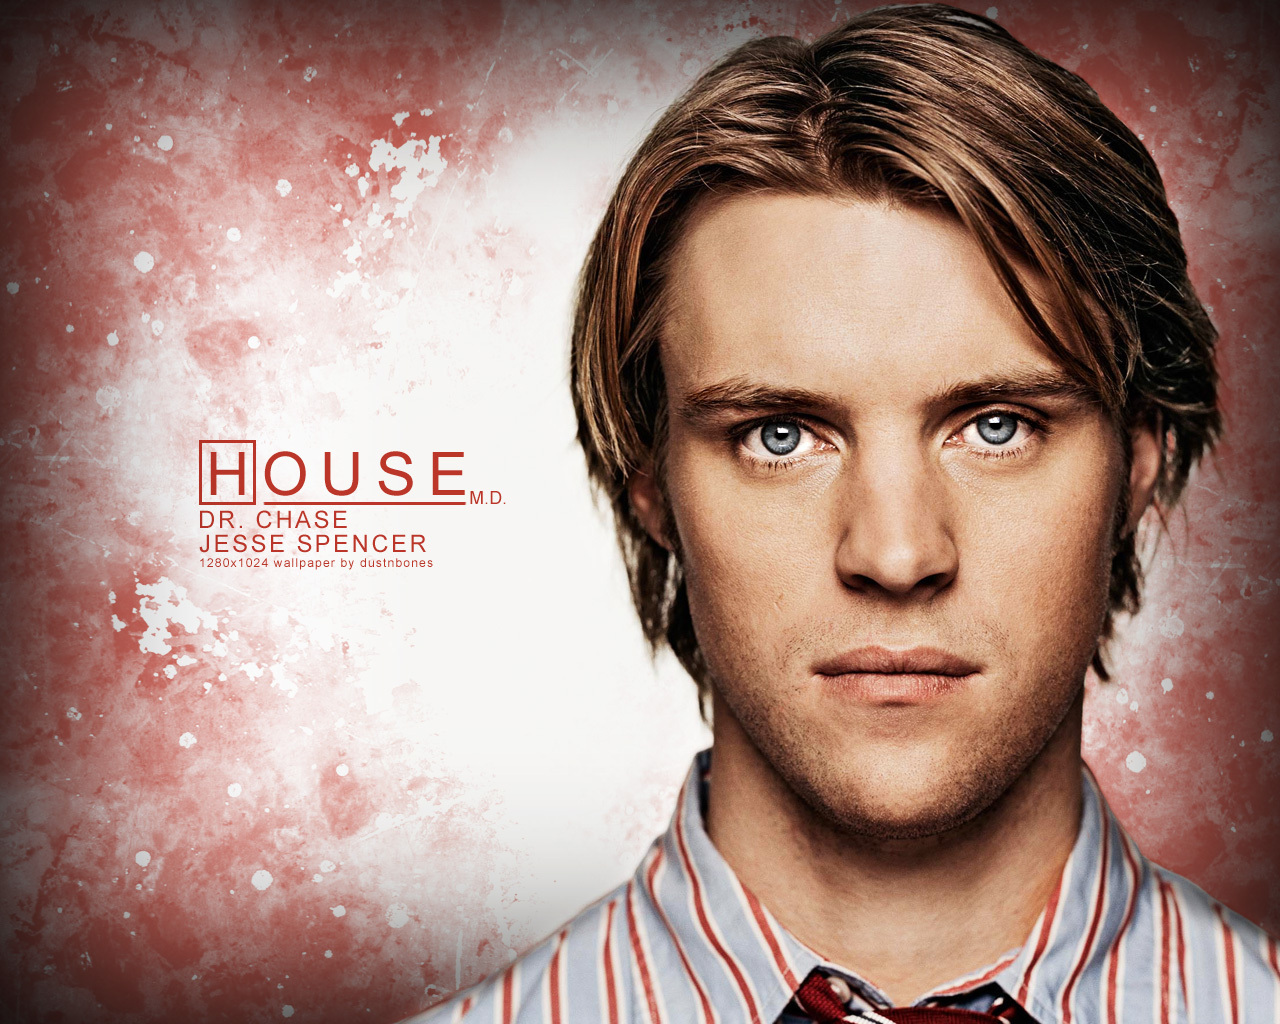 House M.D.: Dr. Chase